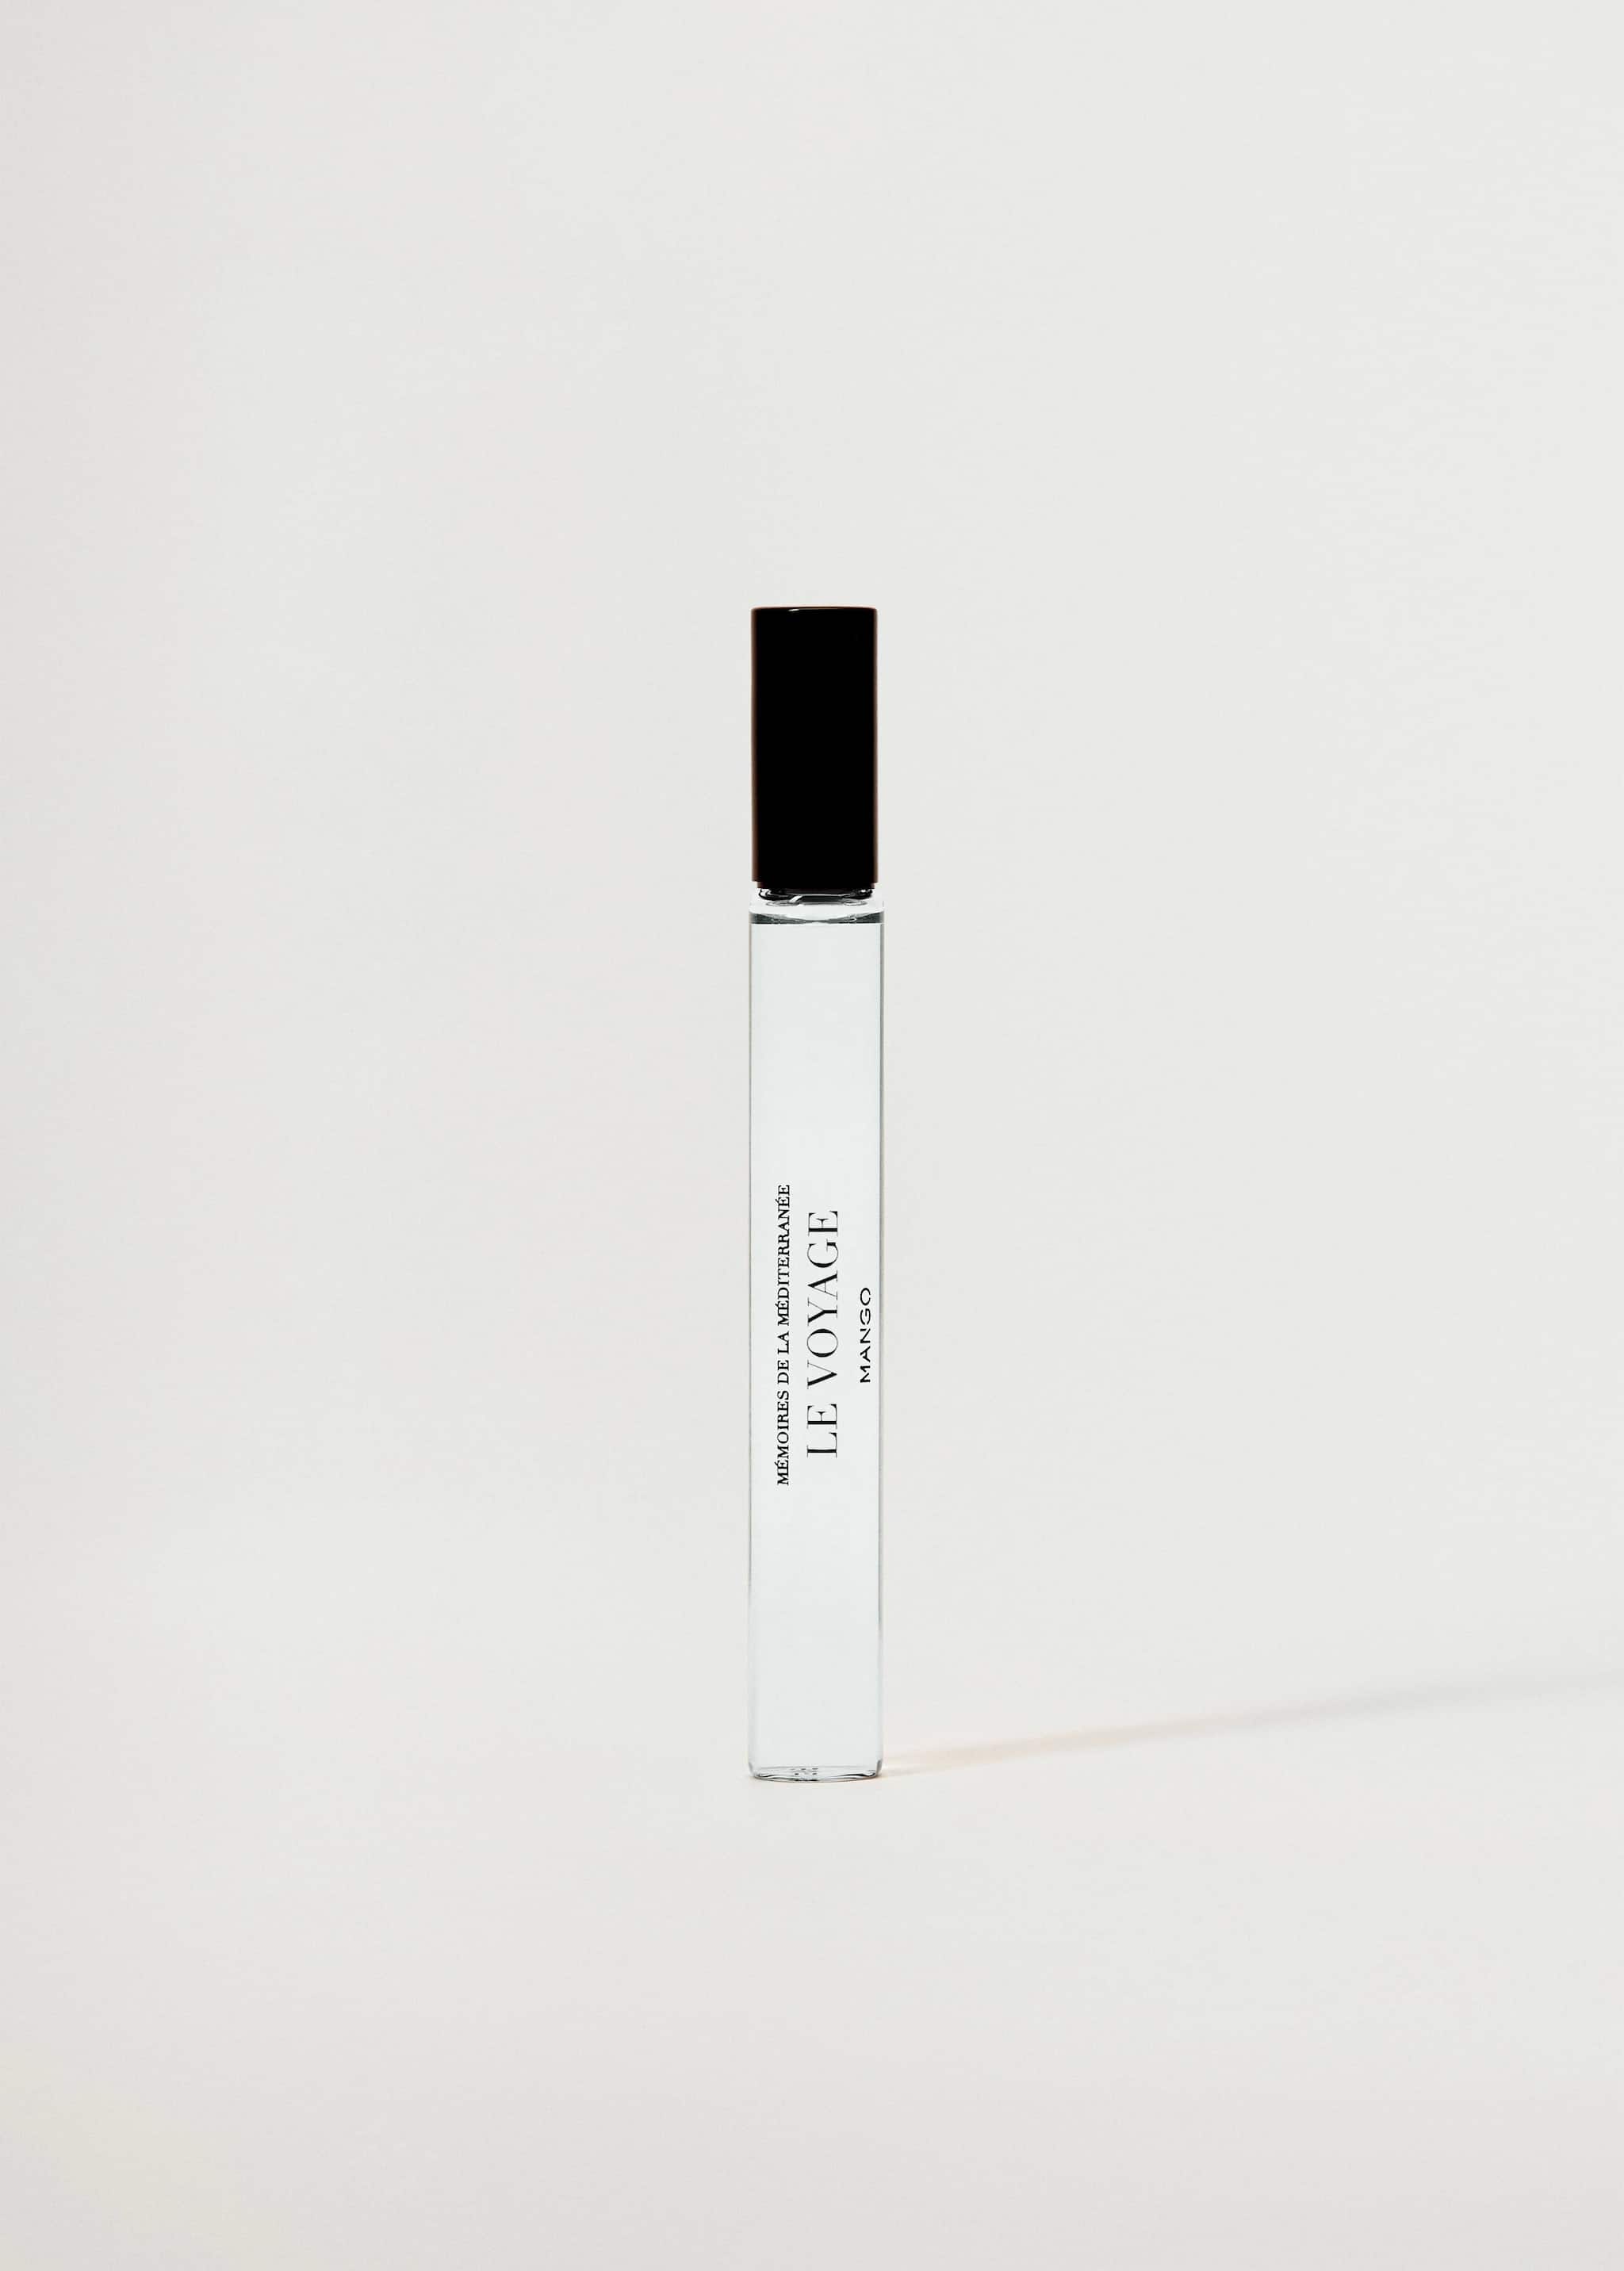 Le Voyage fragance 10 ml - Article without model